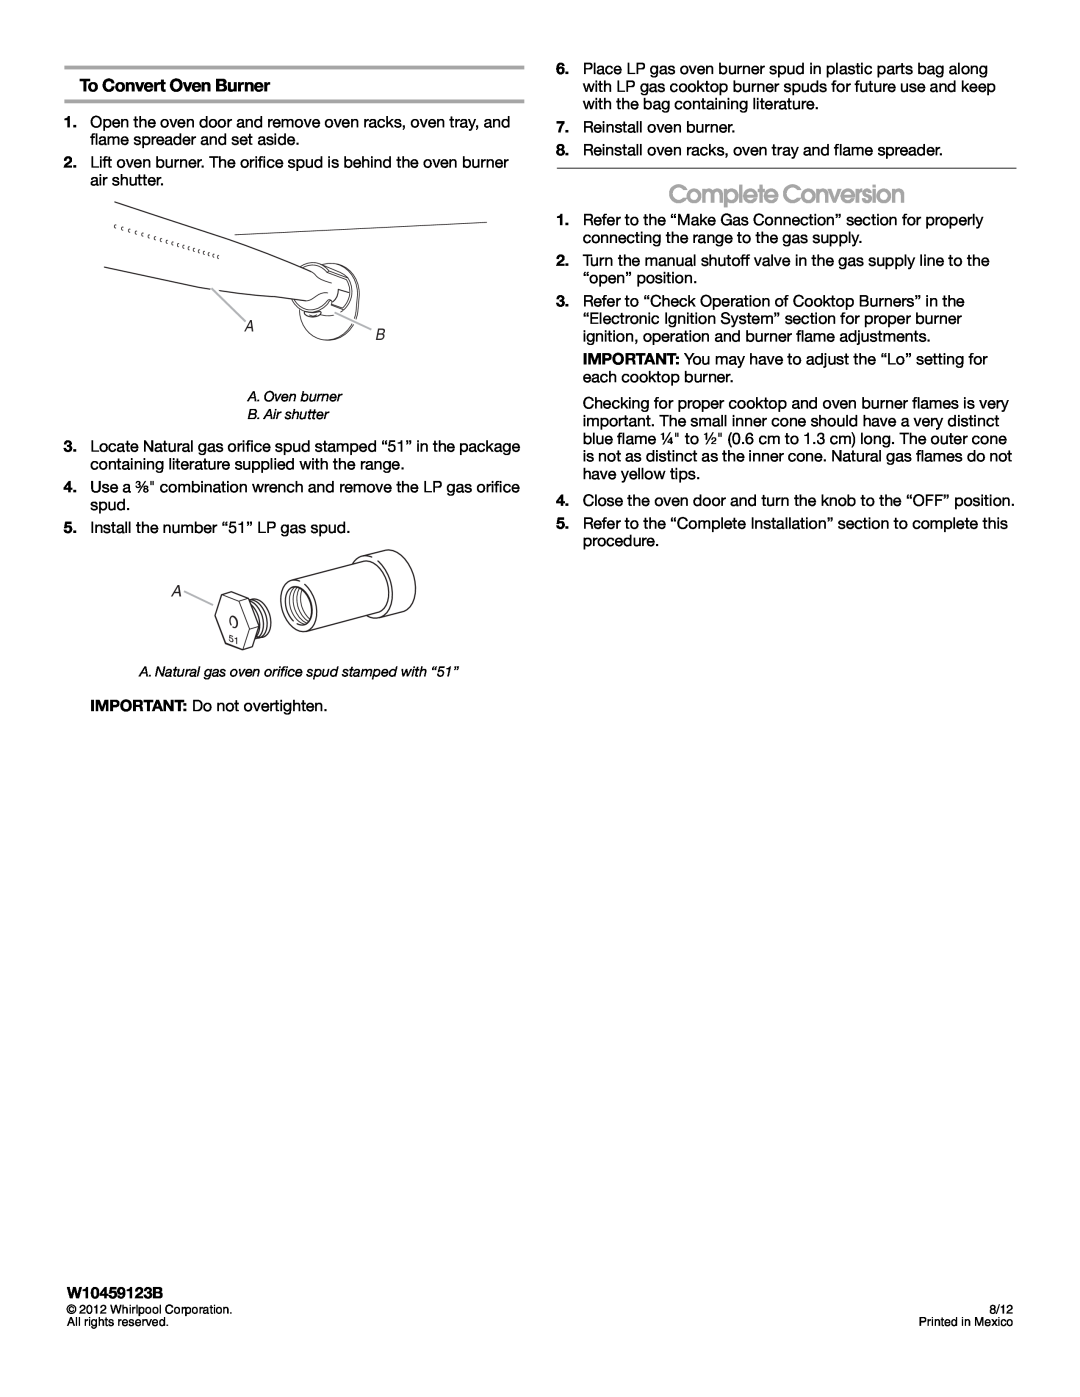 Whirlpool W10459123B Complete Conversion, To Convert Oven Burner, Whirlpool Corporation, 8/12, All rights reserved 